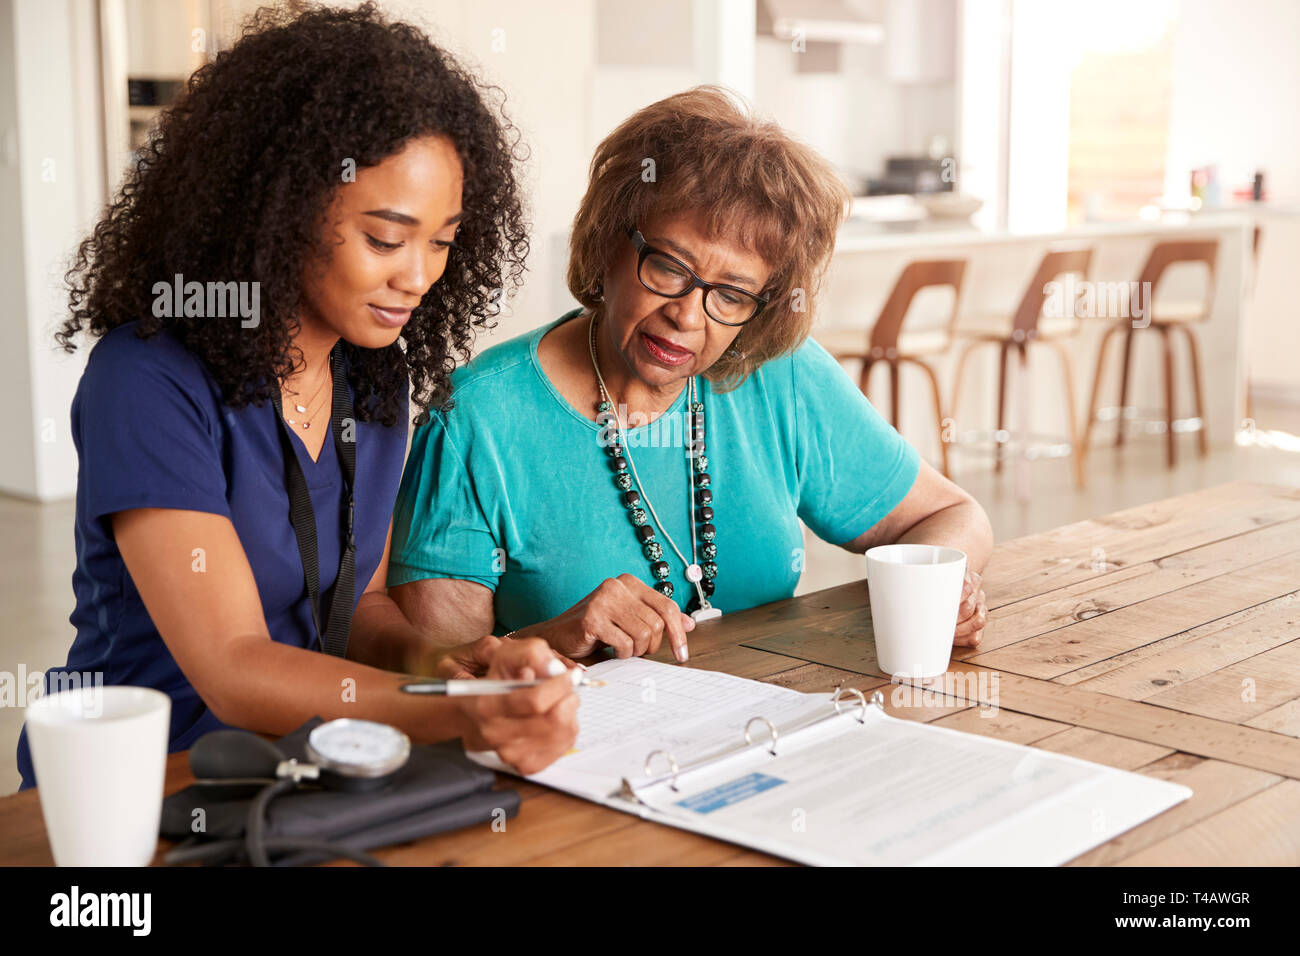 Female healthcare worker filling in a form with a senior woman during a home health visit Stock Photo